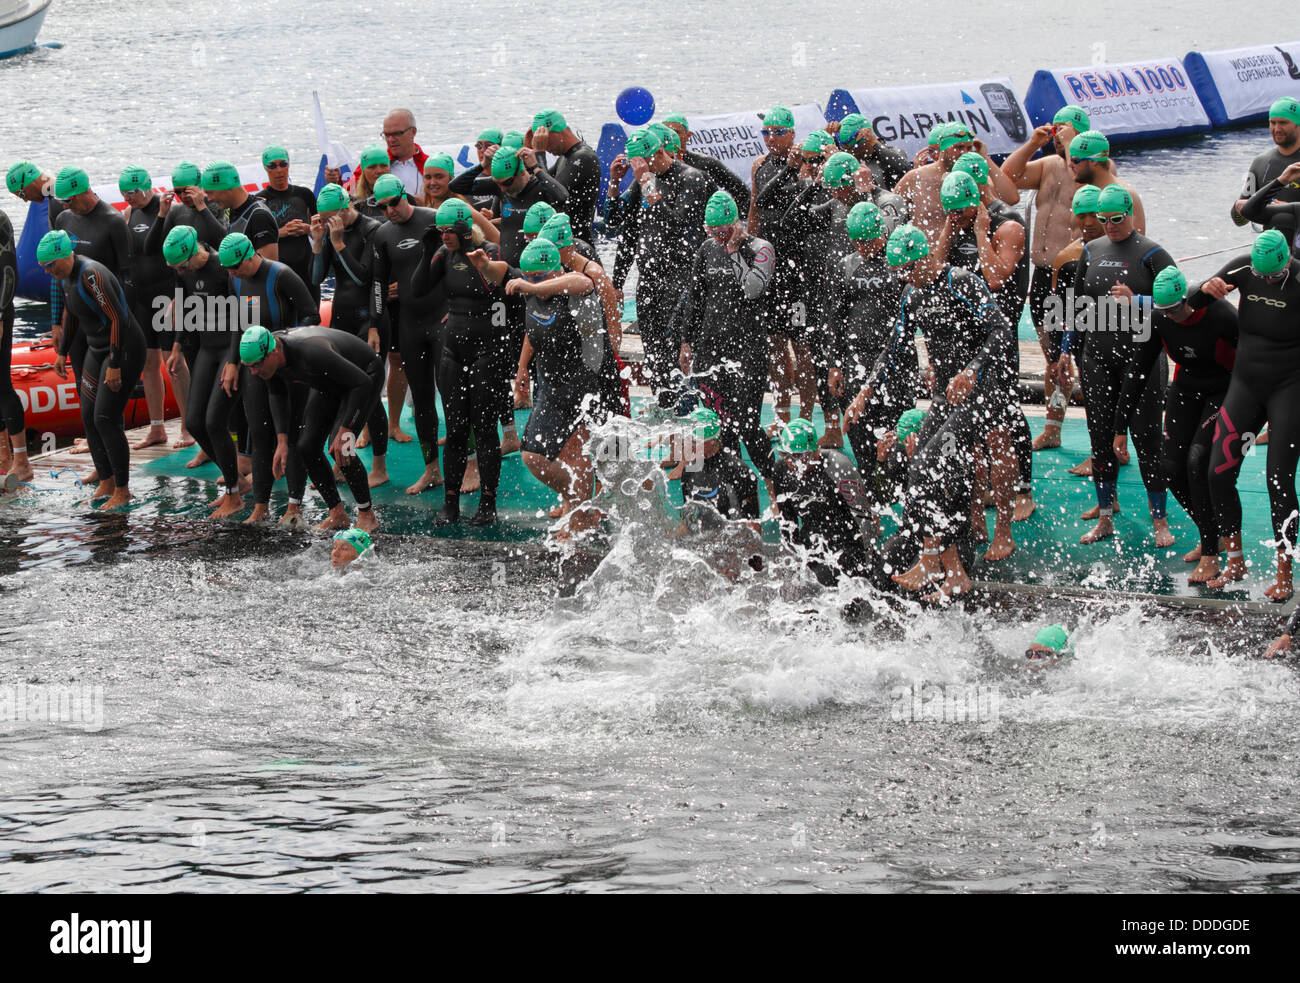 Copenhagen, Denmark. 31st Aug, 2013. 2,400 swim round the Parliament building, the Christiansborg Castle or Palace in central Copenhagen in the 2,000 m largest annual open water competition in Denmark, the Copenhagen Swim, organised by the Danish Swimming Federation and the newspaper Politiken. This is right before the start of the first heat, delayed about two hours by the environmental control due to a sewage overflow caused by a downpour the night before. Start and finish jetty. Credit:  Niels Quist/Alamy Live News Stock Photo